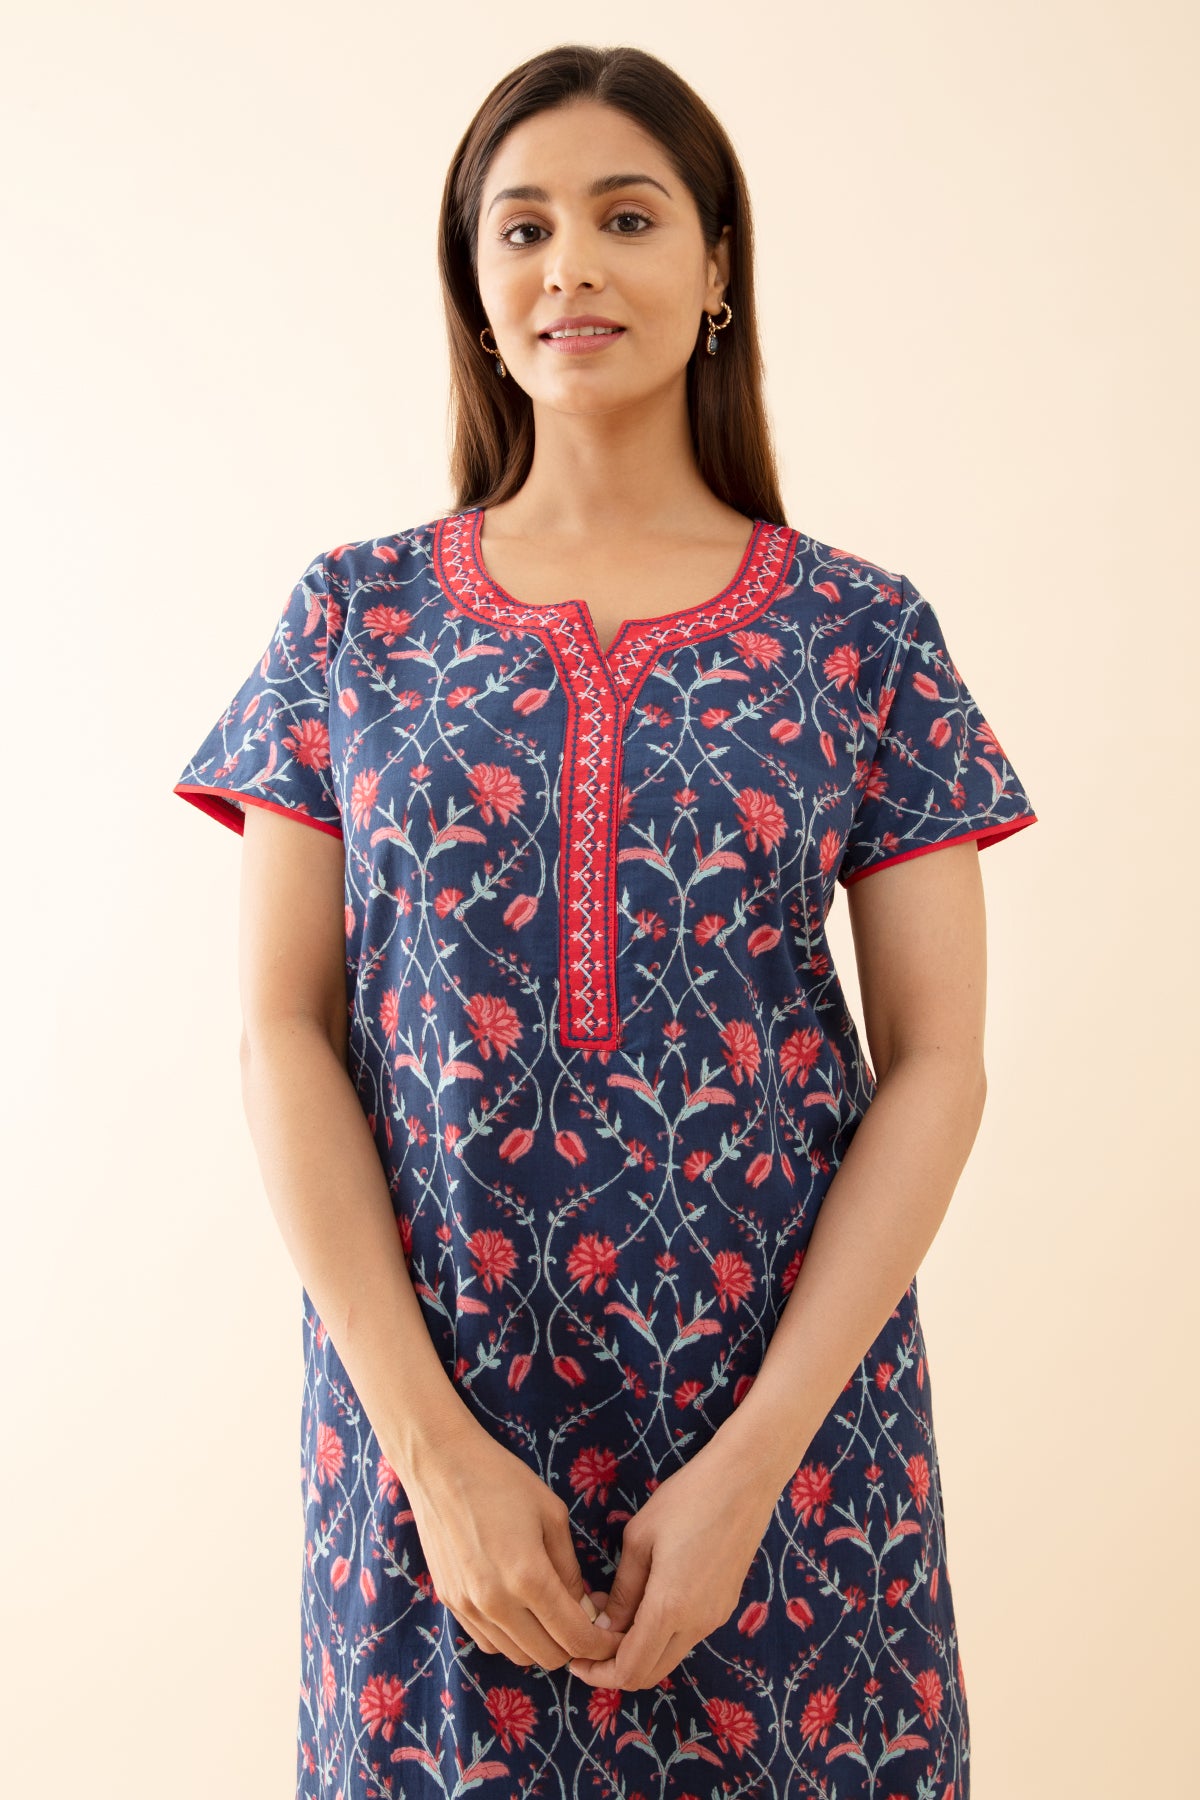 Floral Printed Nighty with Contrast Embroidered Yoke - Blue